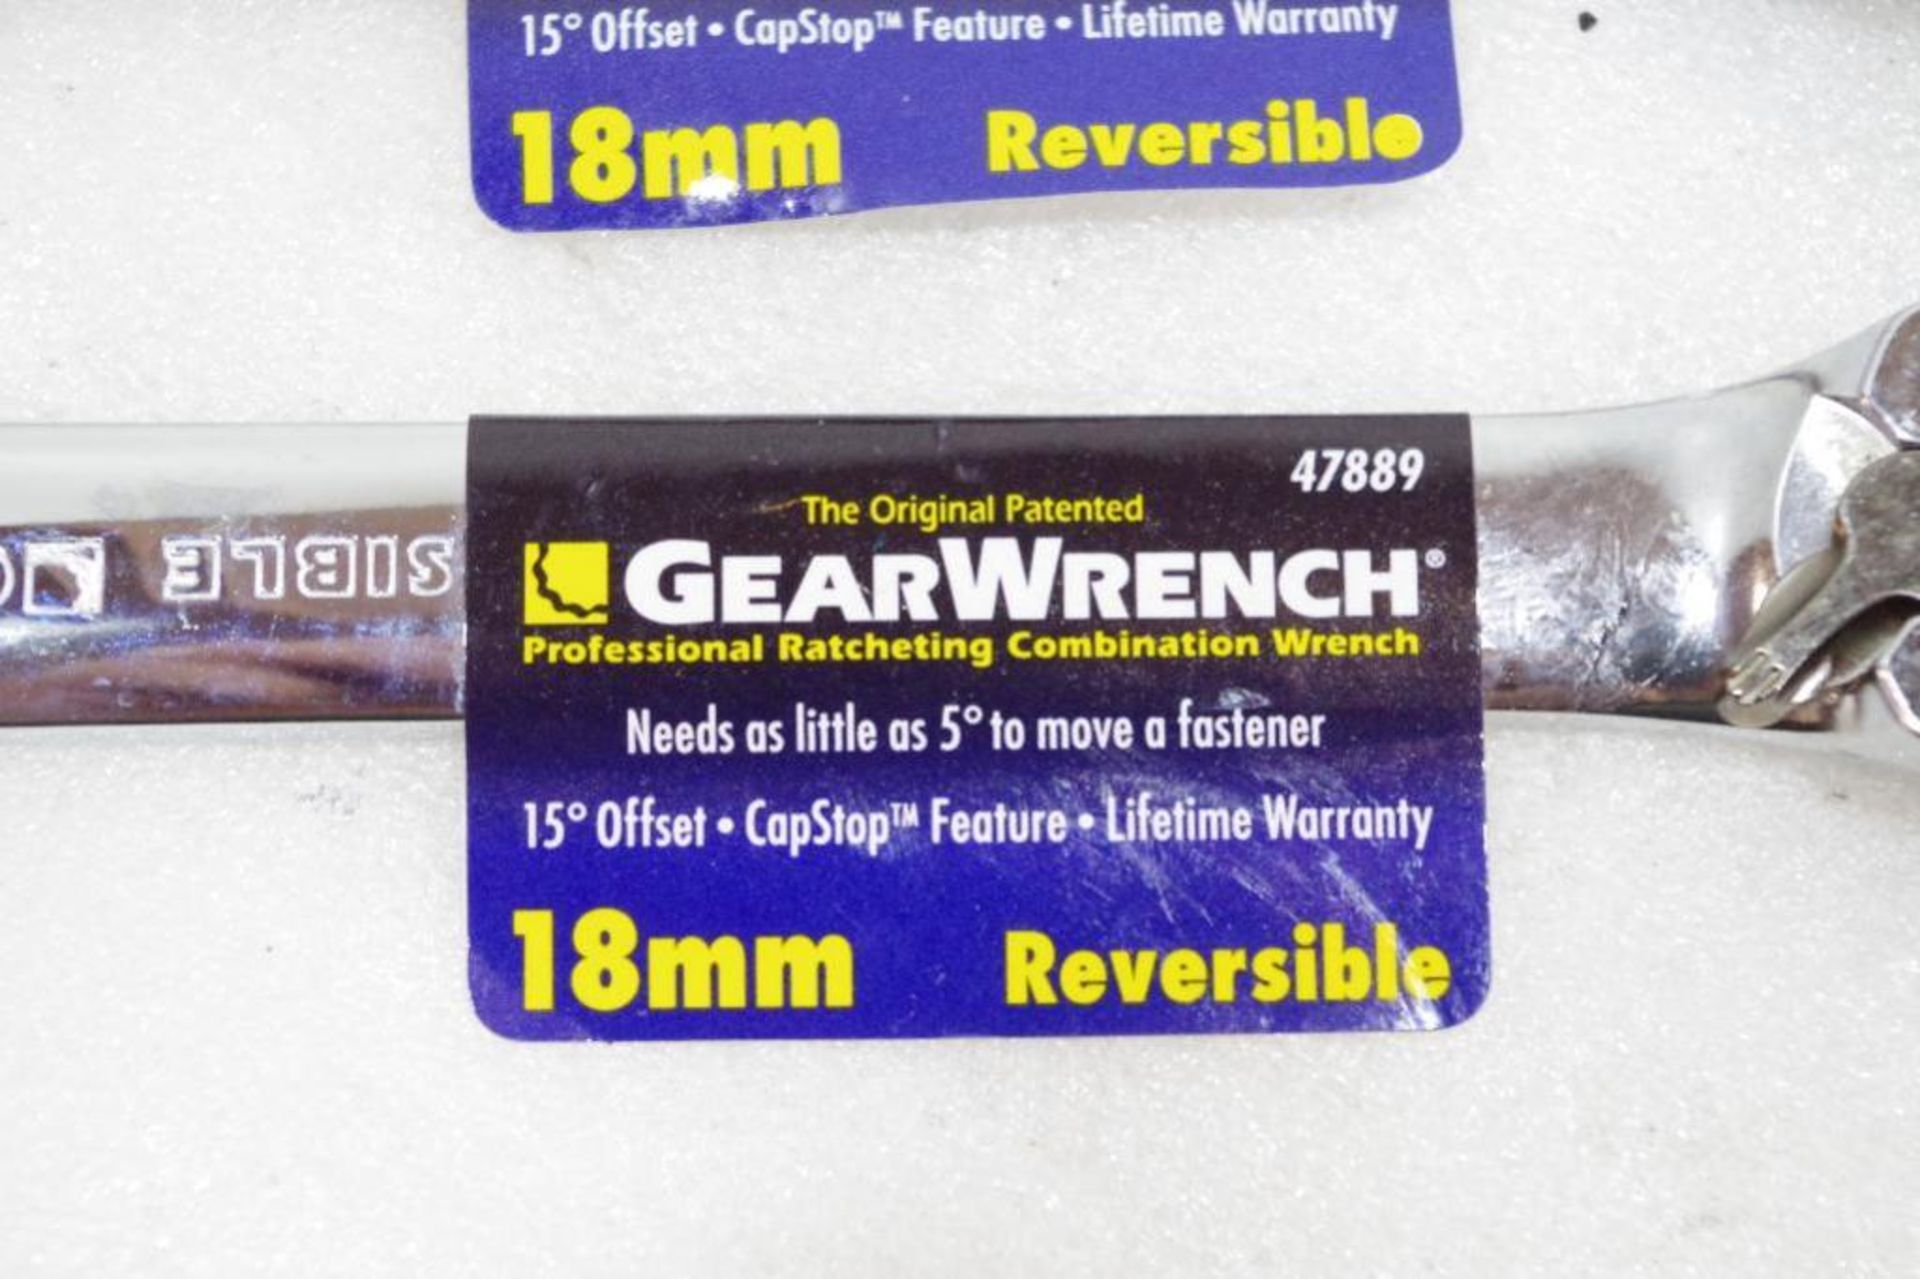 [10] NEW GEAR WRENCH 18mm Reversible Professional Ratcheting Combination Wrenches - Image 2 of 3